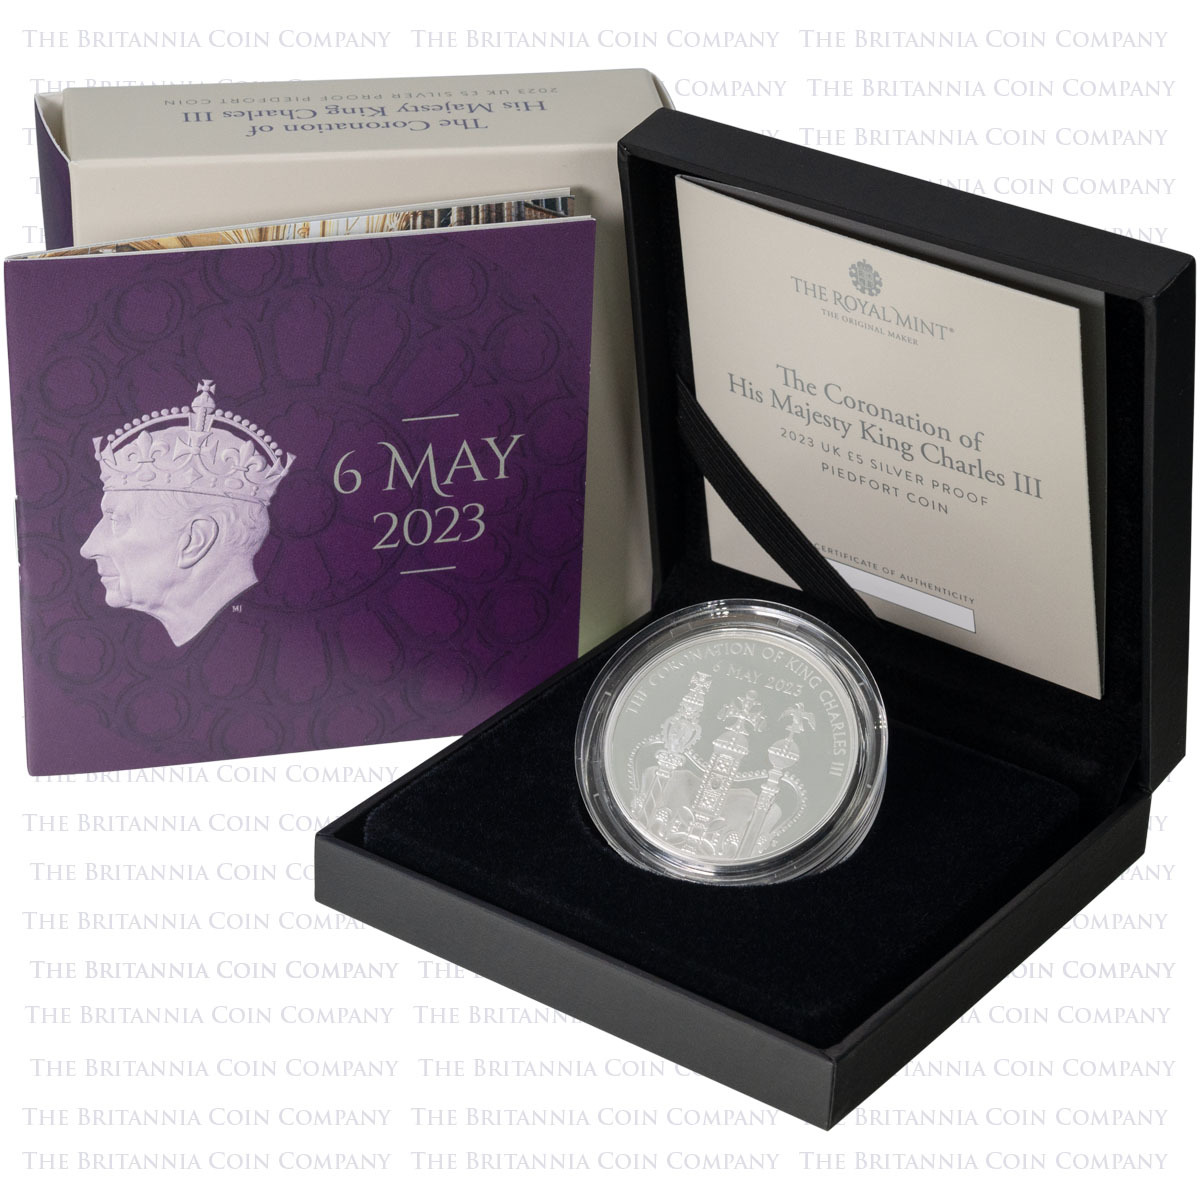 UK23KCPF 2023 King Charles III Coronation Five Pound Crown Piedfort Silver Proof Coin Boxed